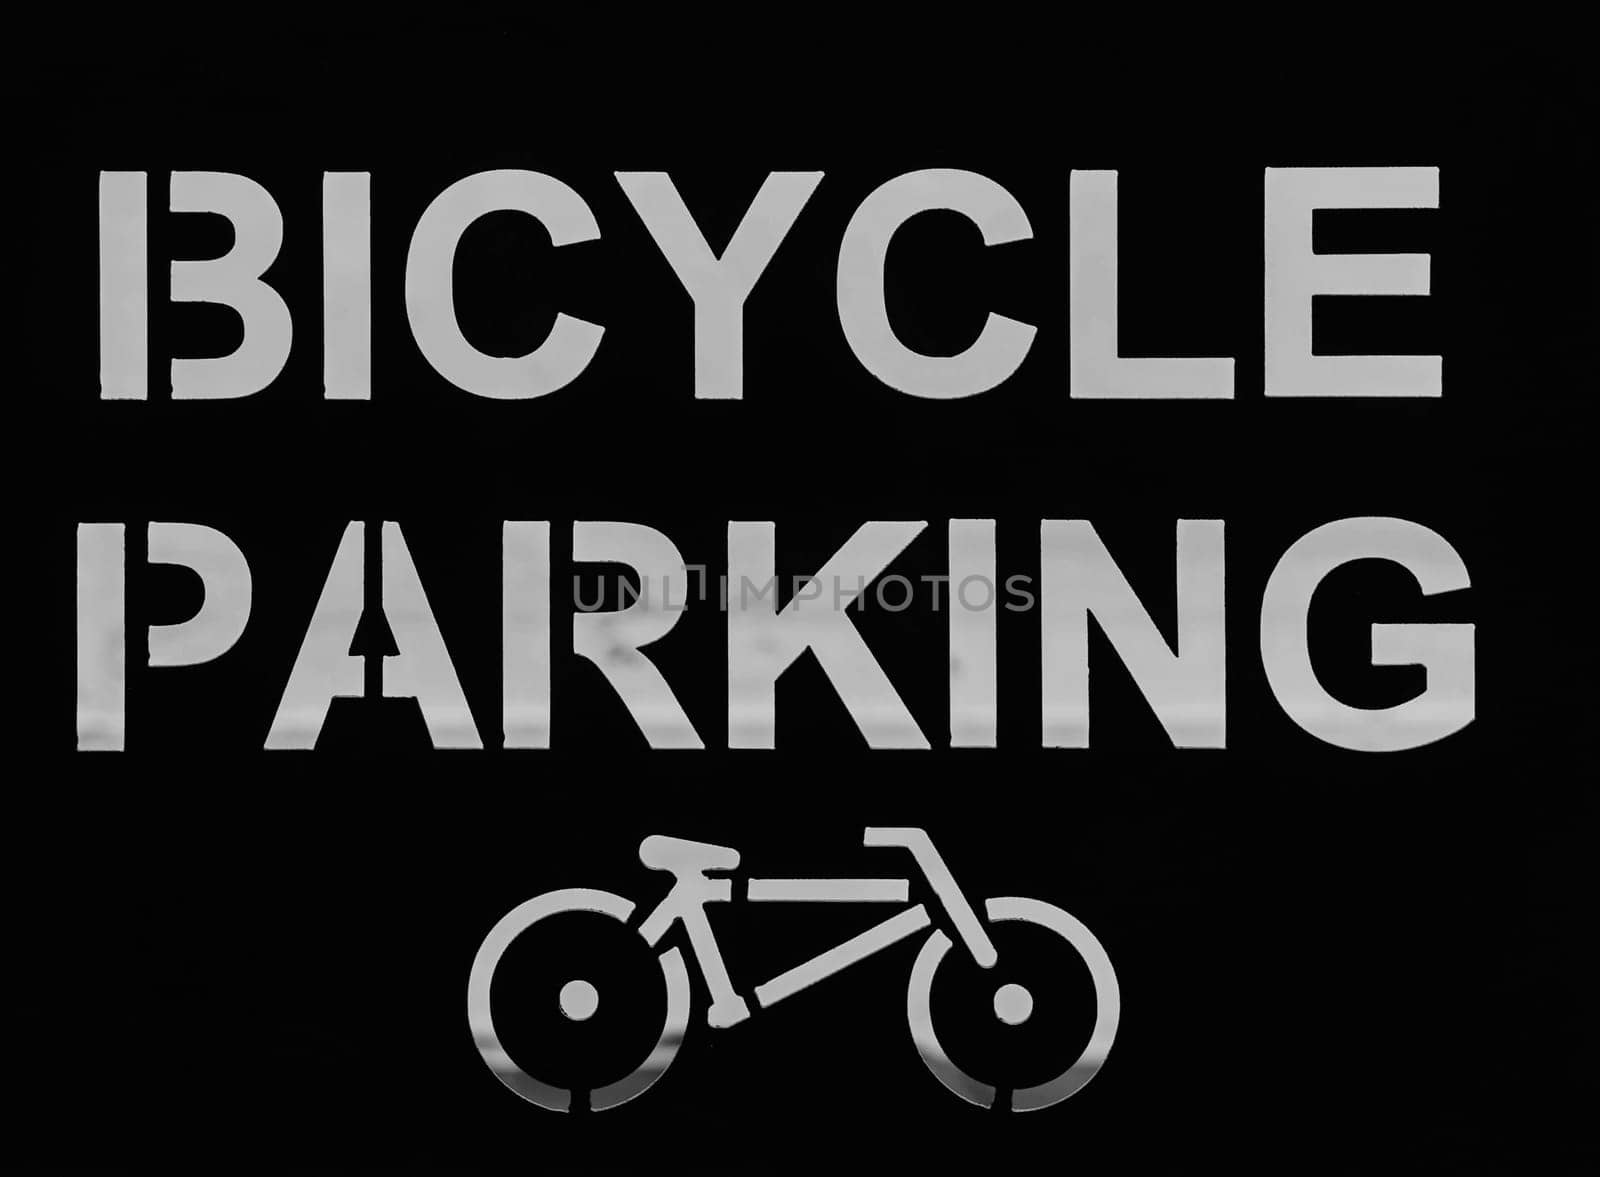 Bicycle parking sign by Ladouski